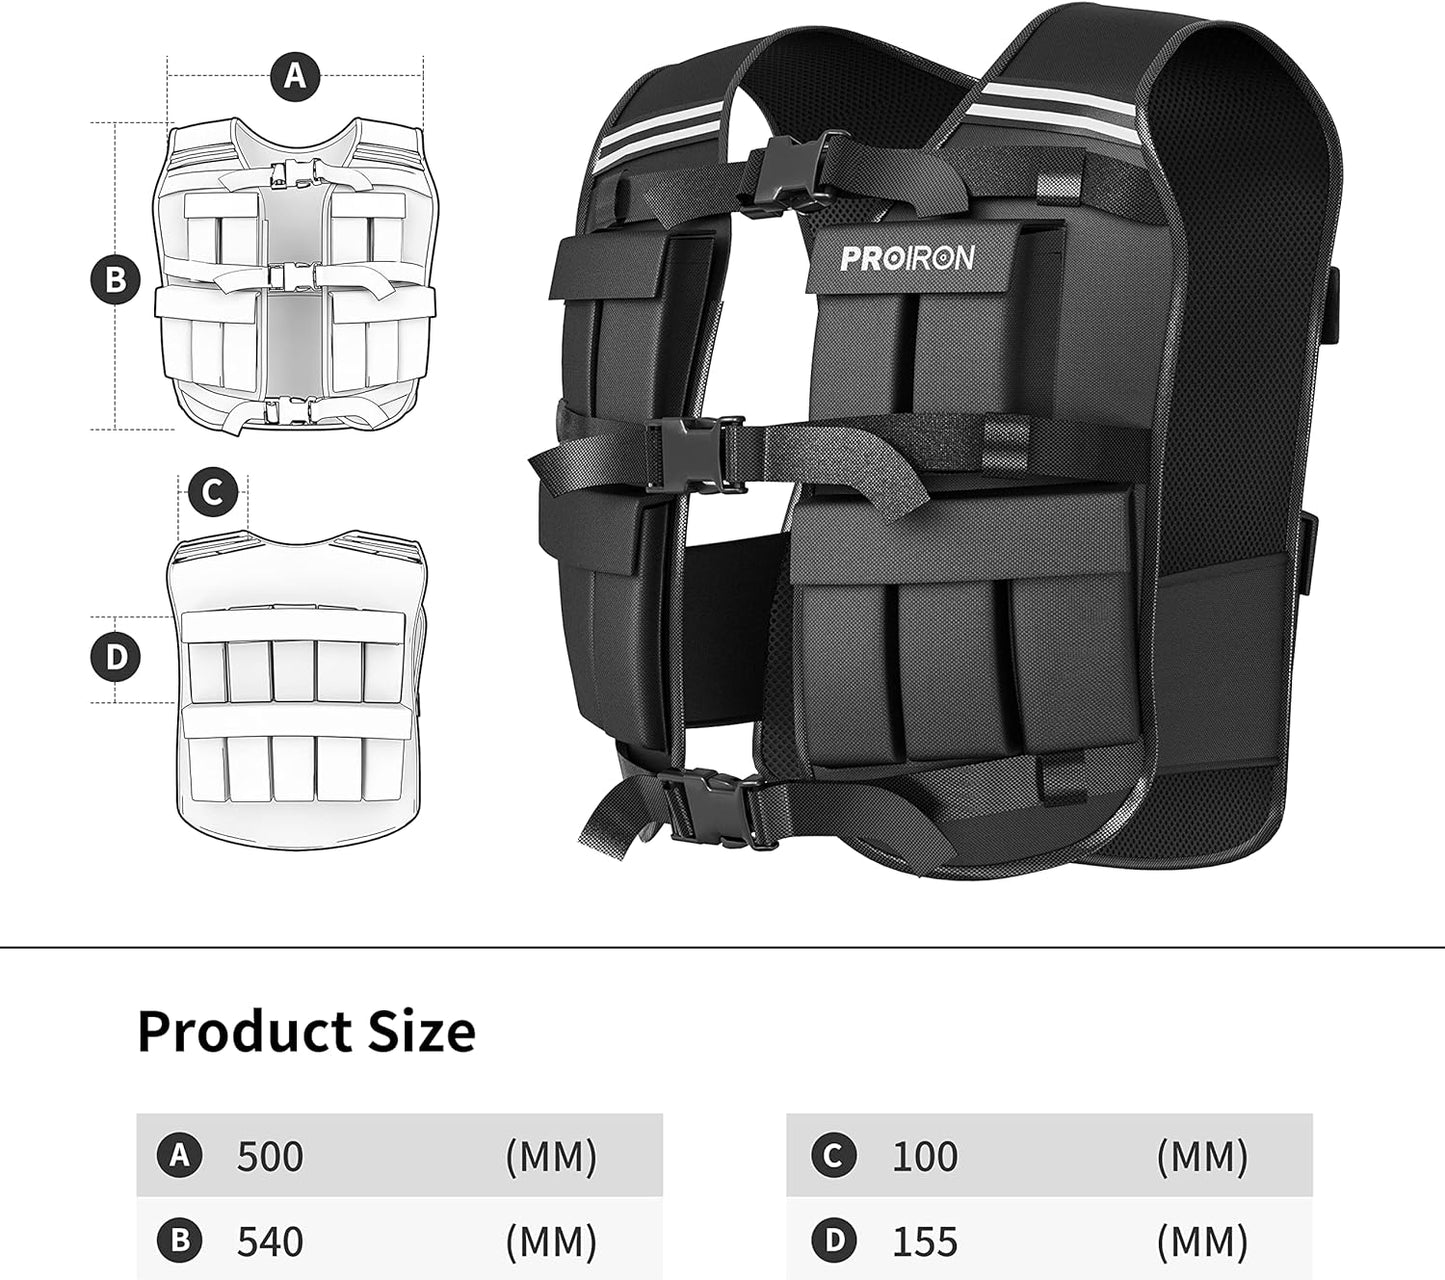 PROIRON Adjustable Weighted Vest, 20 Weight Packs, Weight Jacket Men Women with Reflective Stripe for Running Strength Training Workout Jogging Walking Home Gym Fitness Cardio Weight Loss, Black